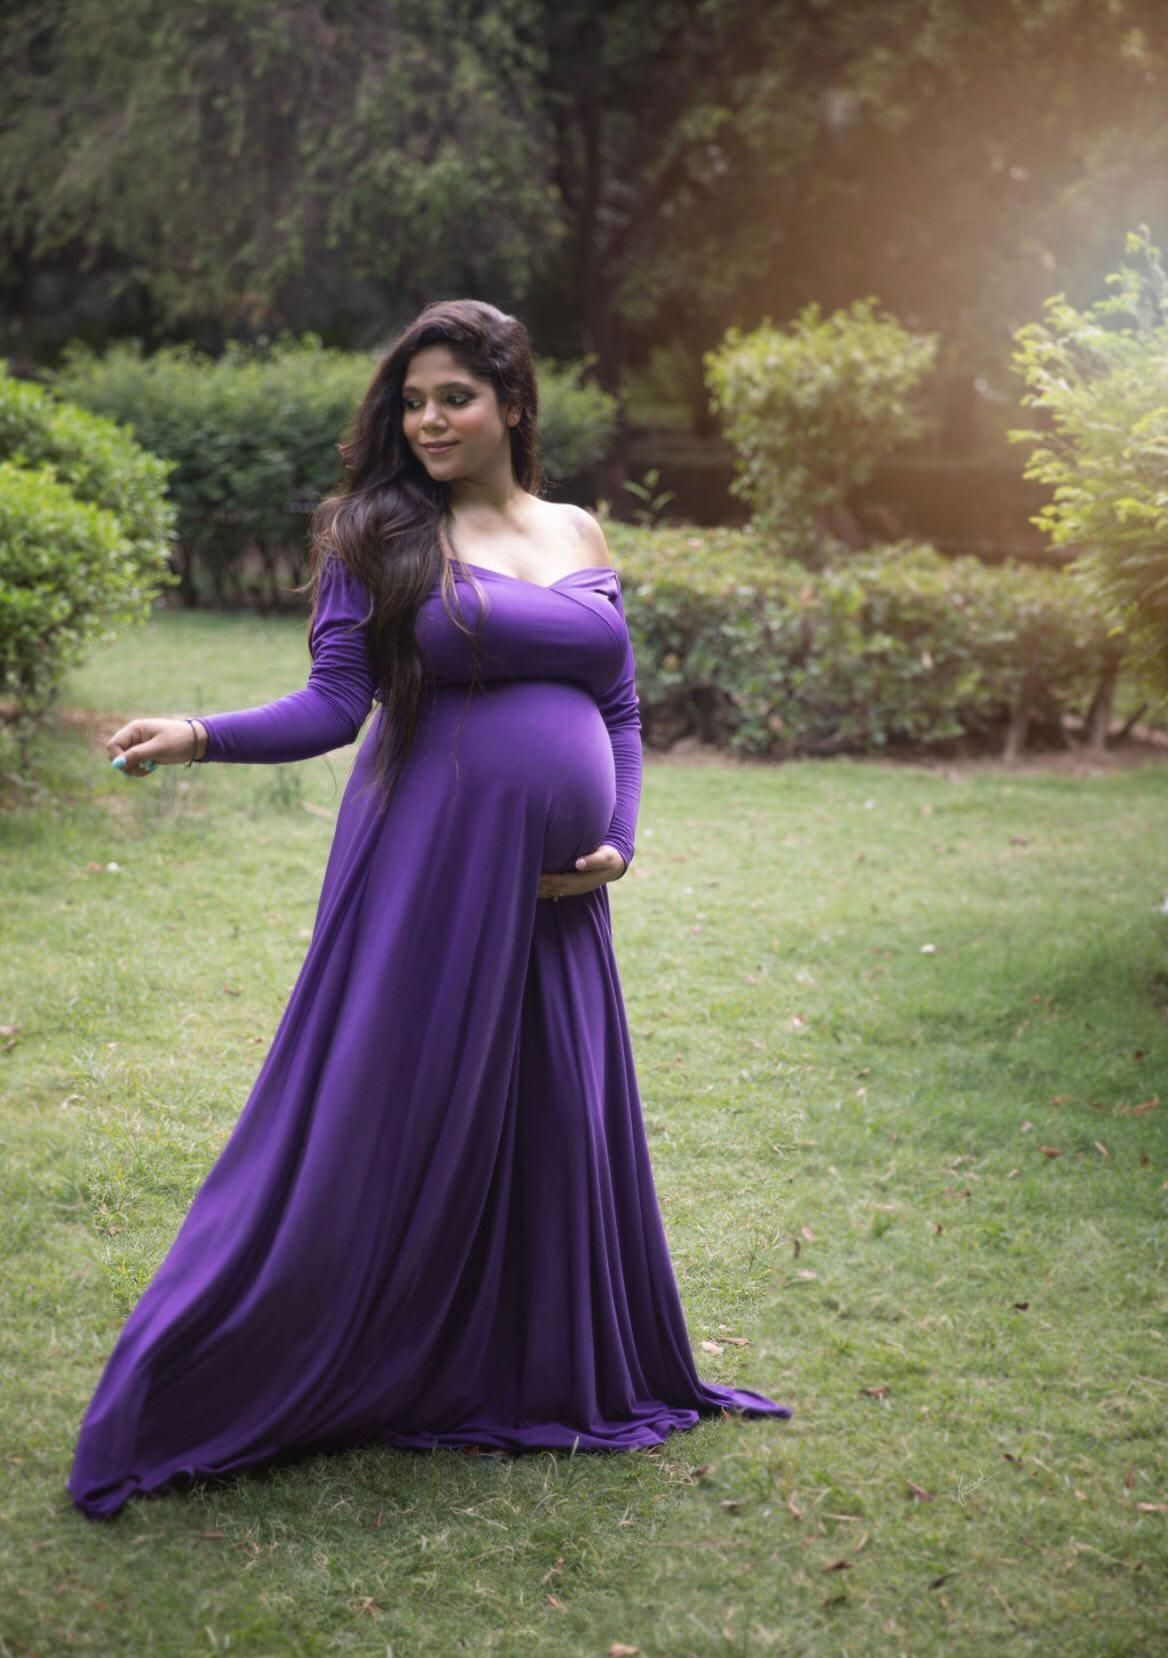 Designarche Beautiful Maternity Dark Purple Floor Length Gown With Full Sleeves maternity wear